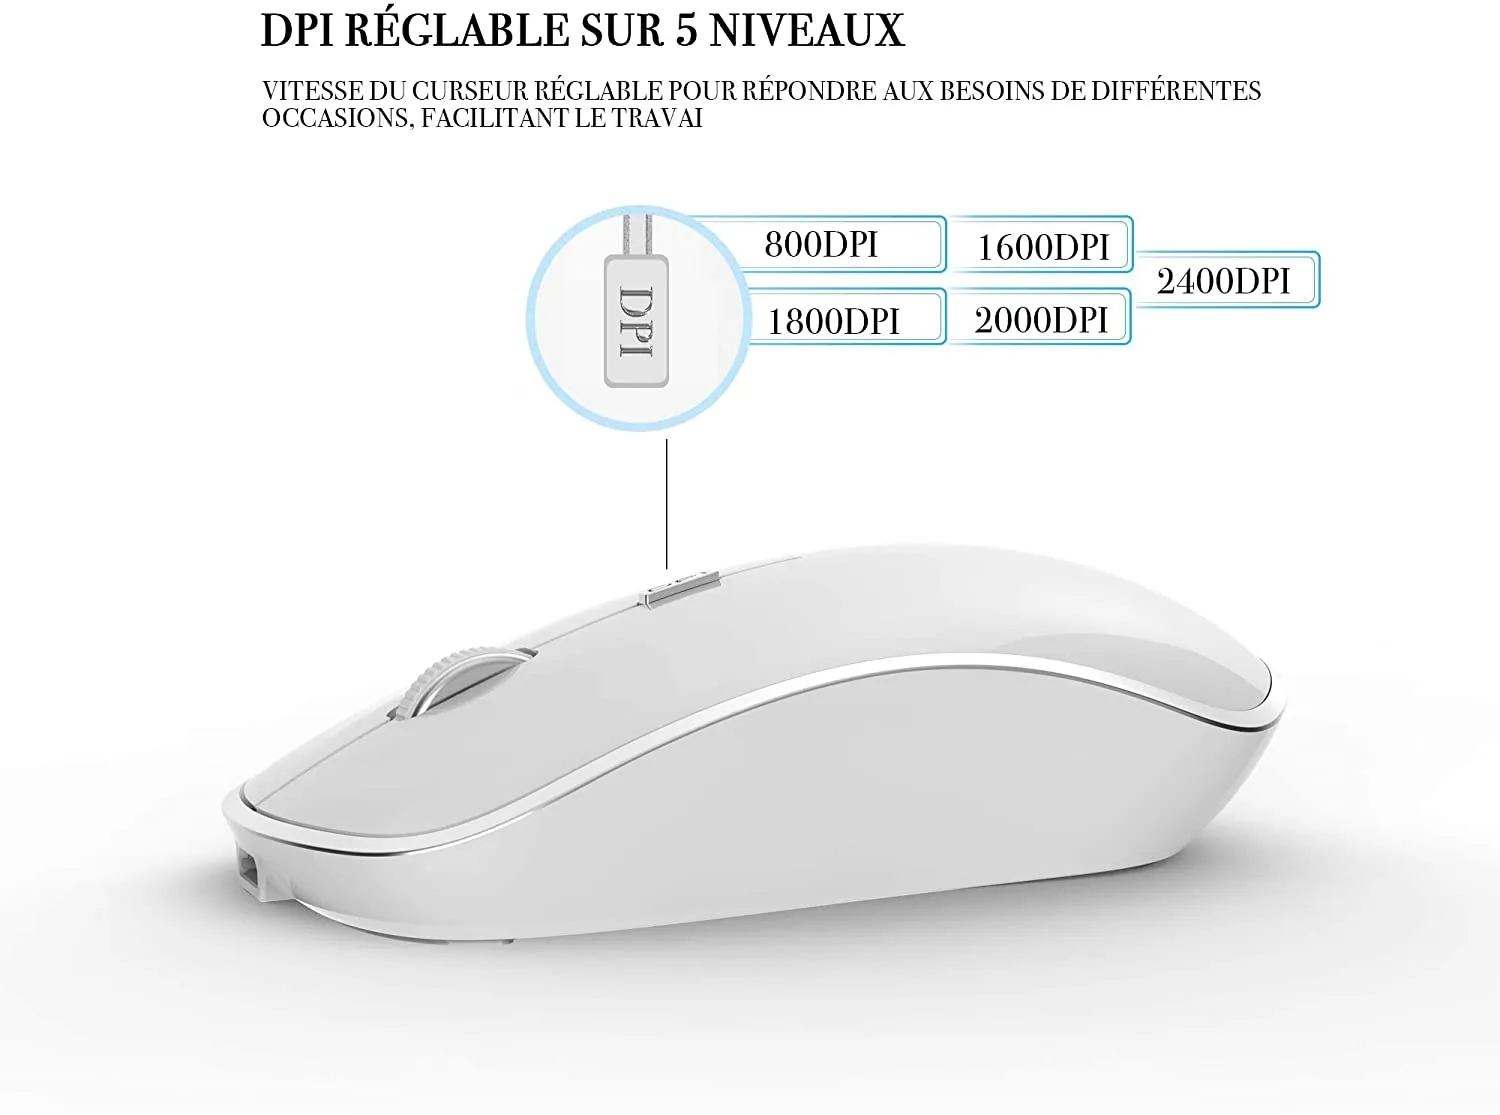 H7f80a9c4fc214bfc923ec1b79bcca398p French 2.4G Wireless Keyboard Mouse Compatible with iMac PC Laptop Tablet Computer Windows (Silver White)